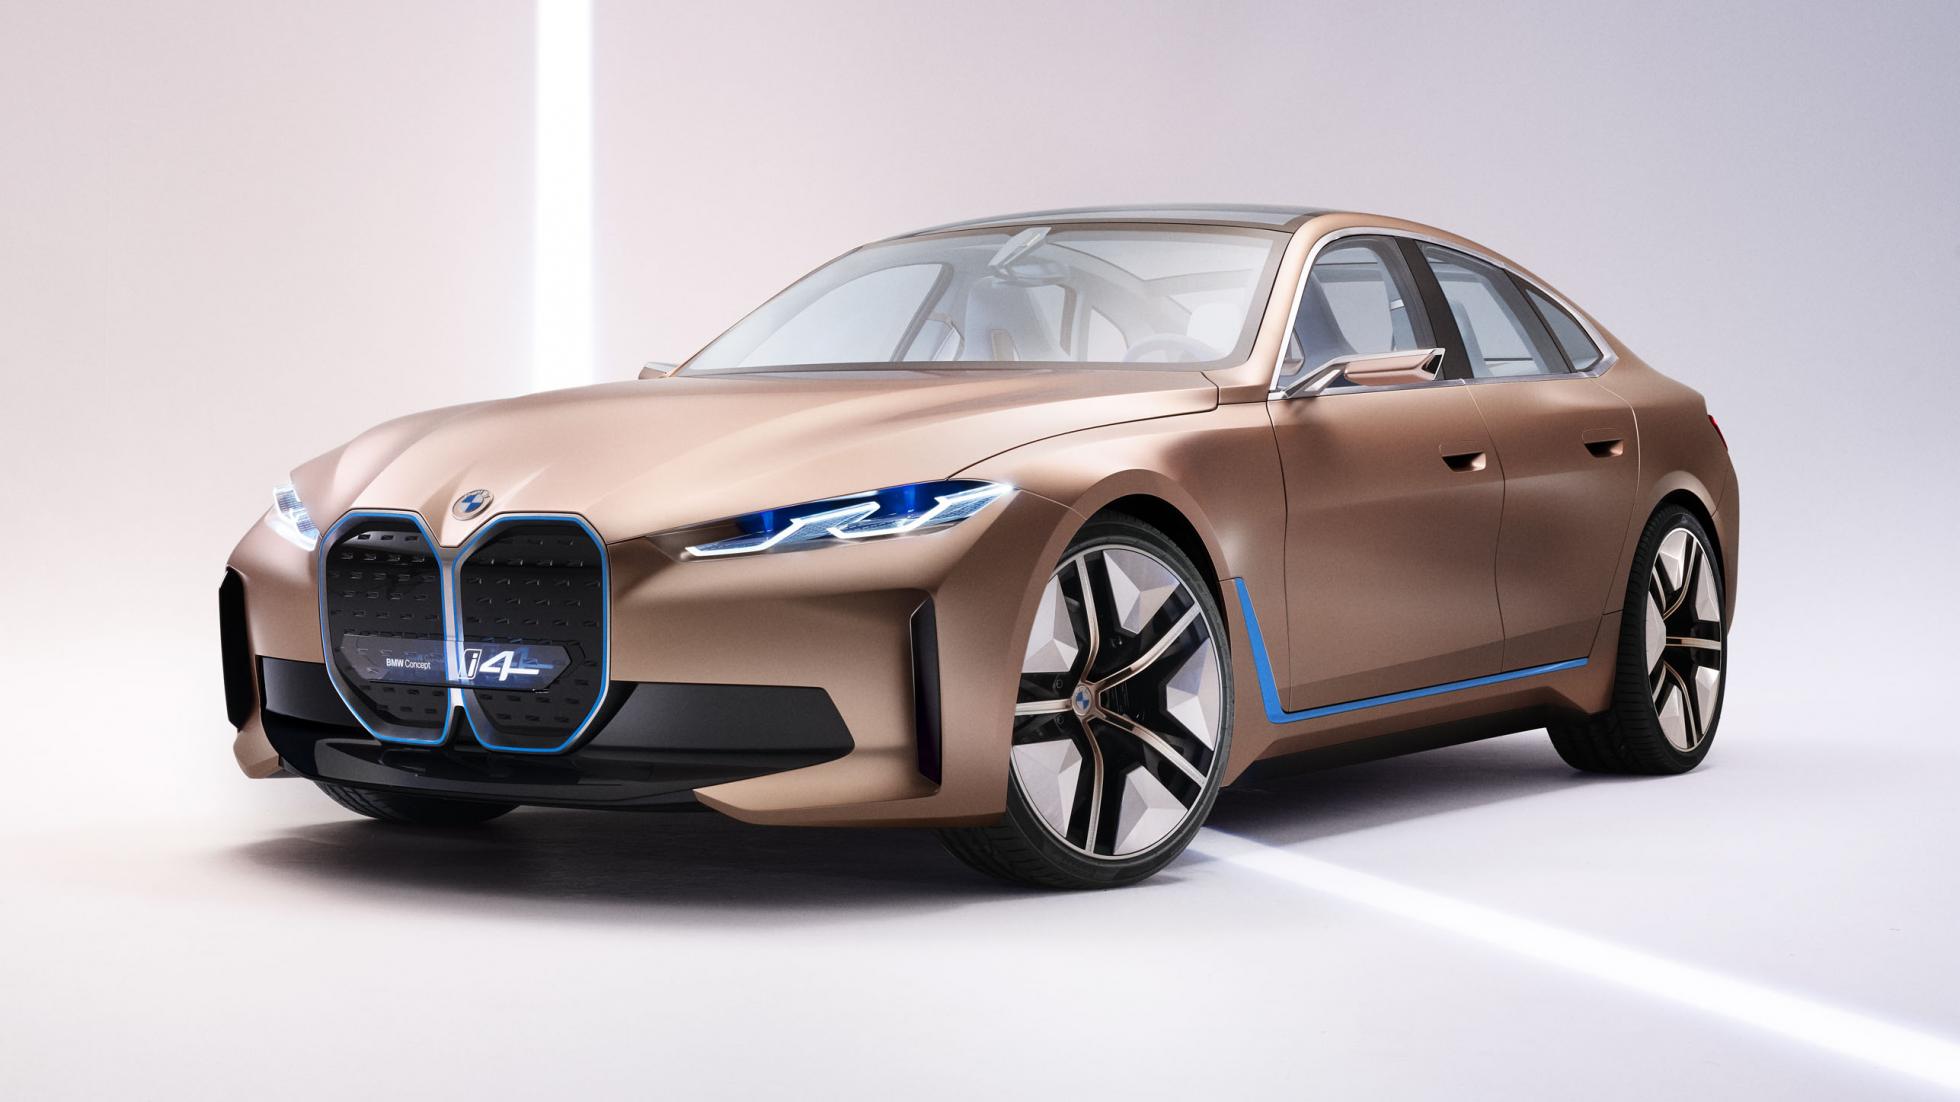 TopGear Behold the allelectric, BMW Concept i4